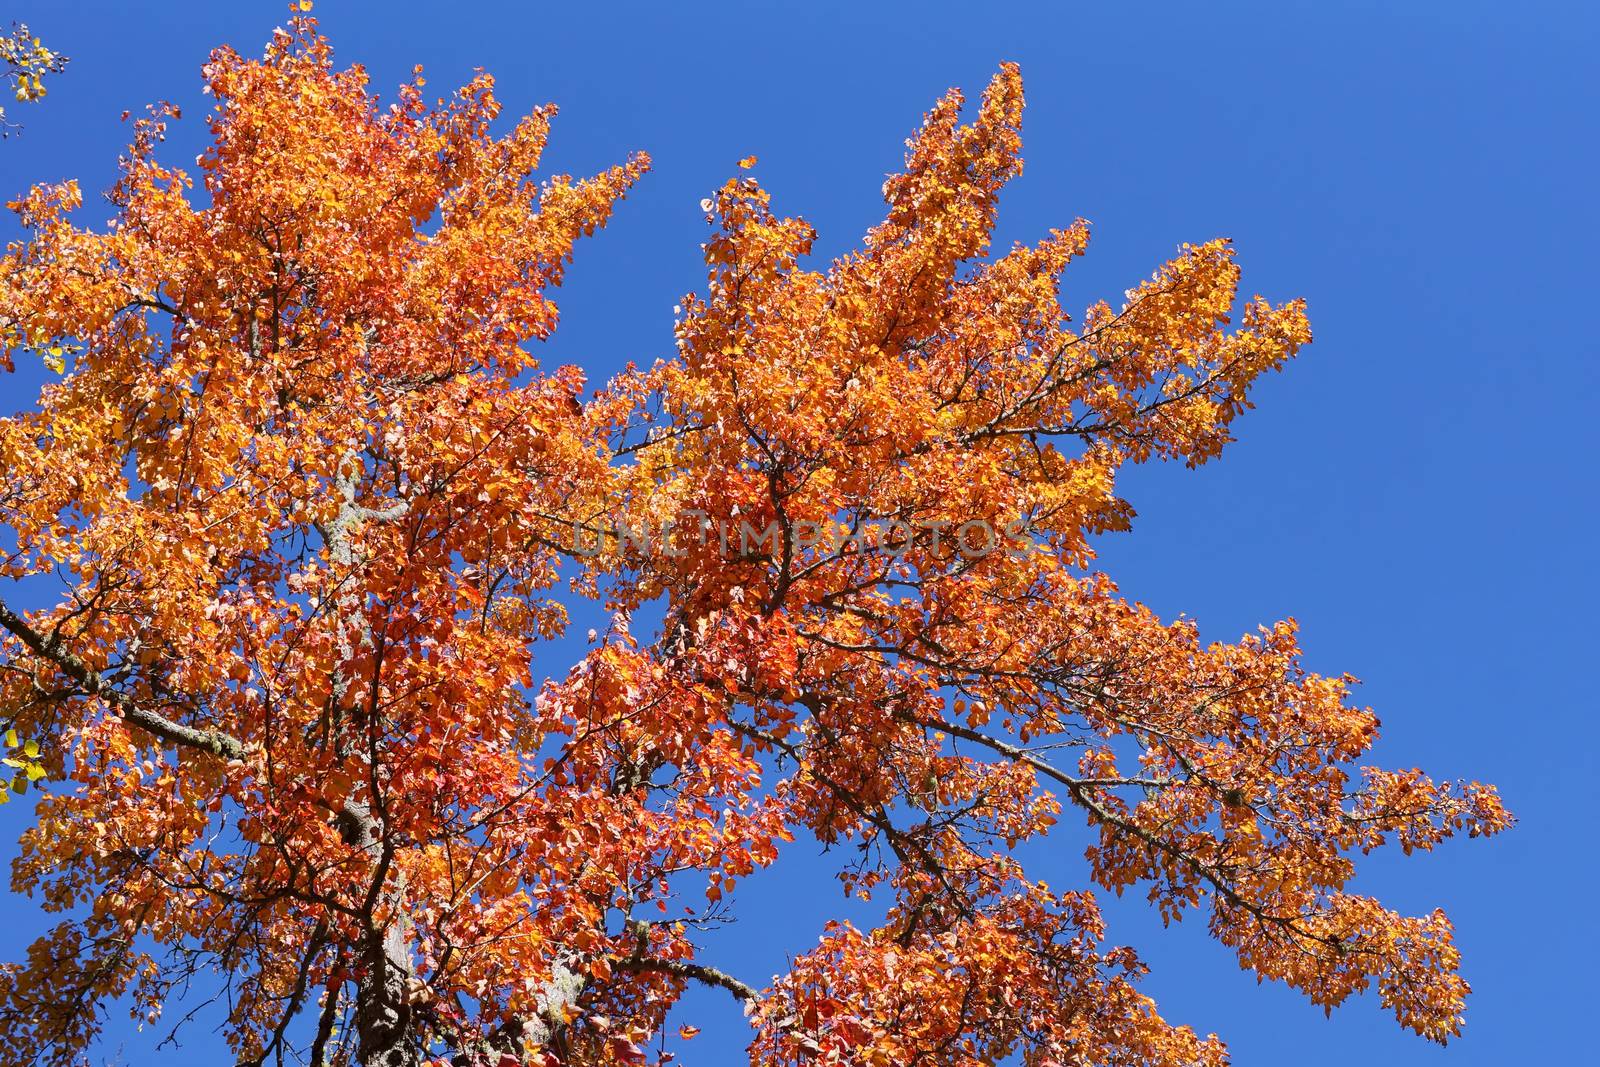 Red leaves and blue sky by Mirage3